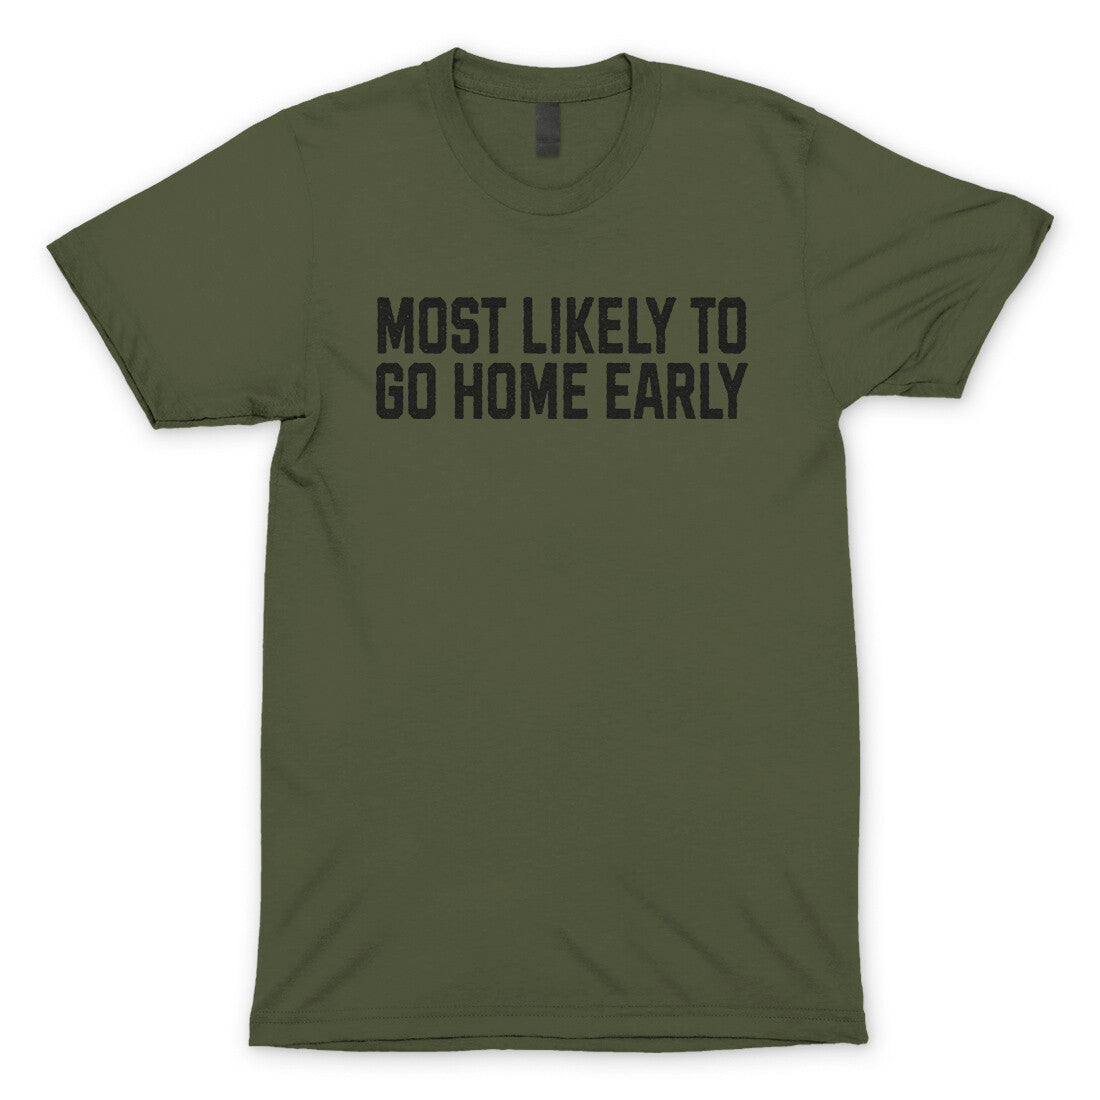 Most Likely to Go Home Early in Military Green Color